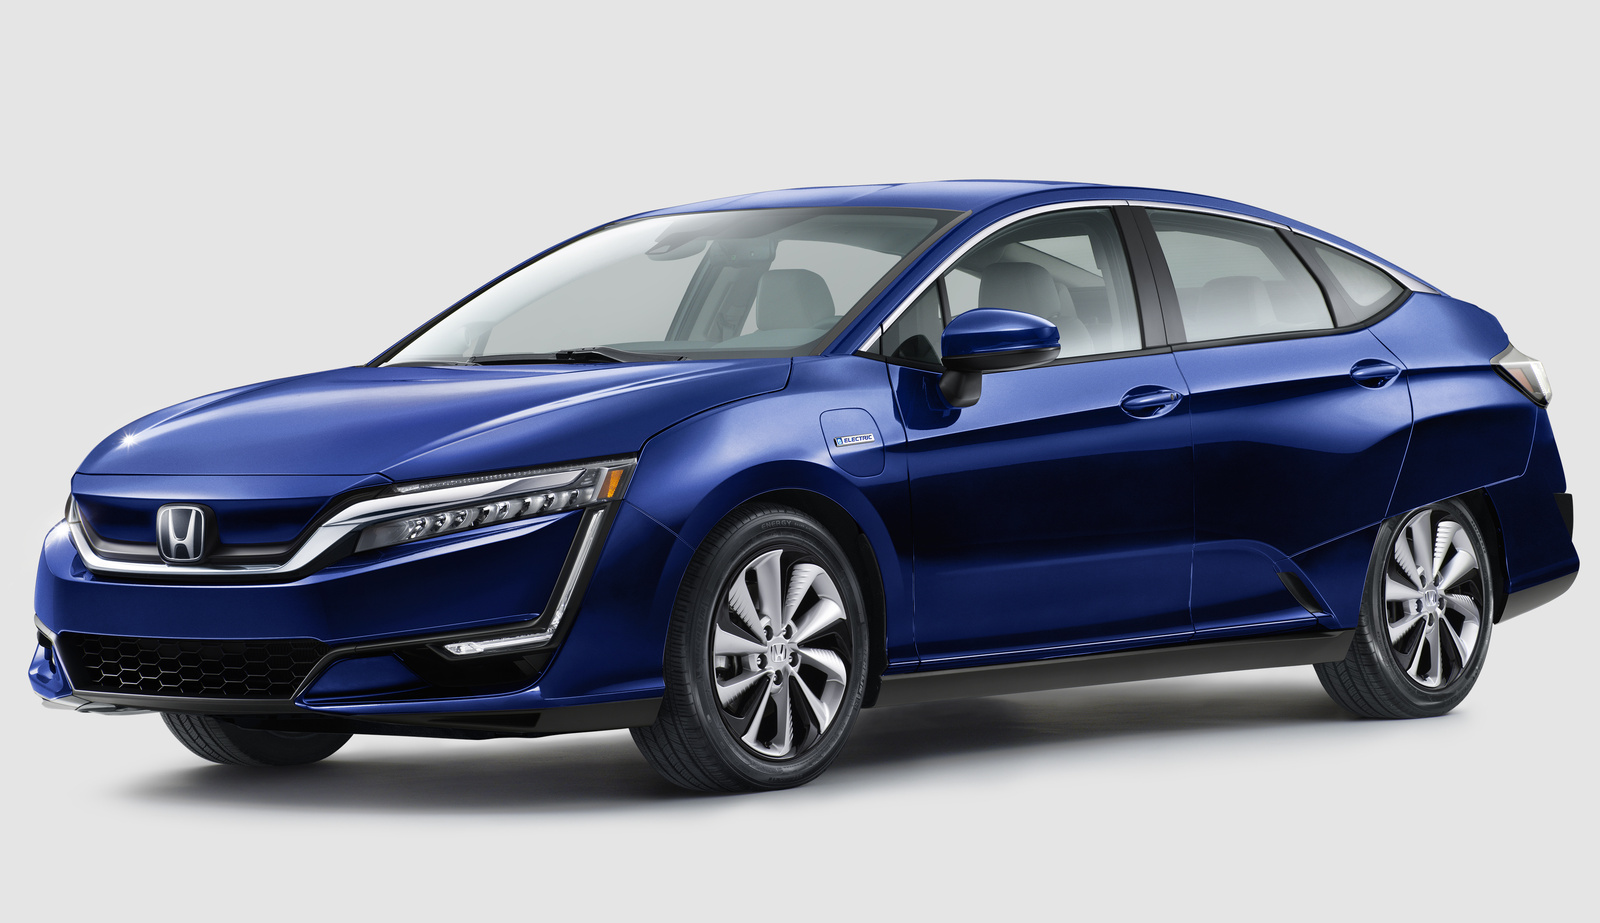 2017 Honda Clarity oem parts and accessories on sale